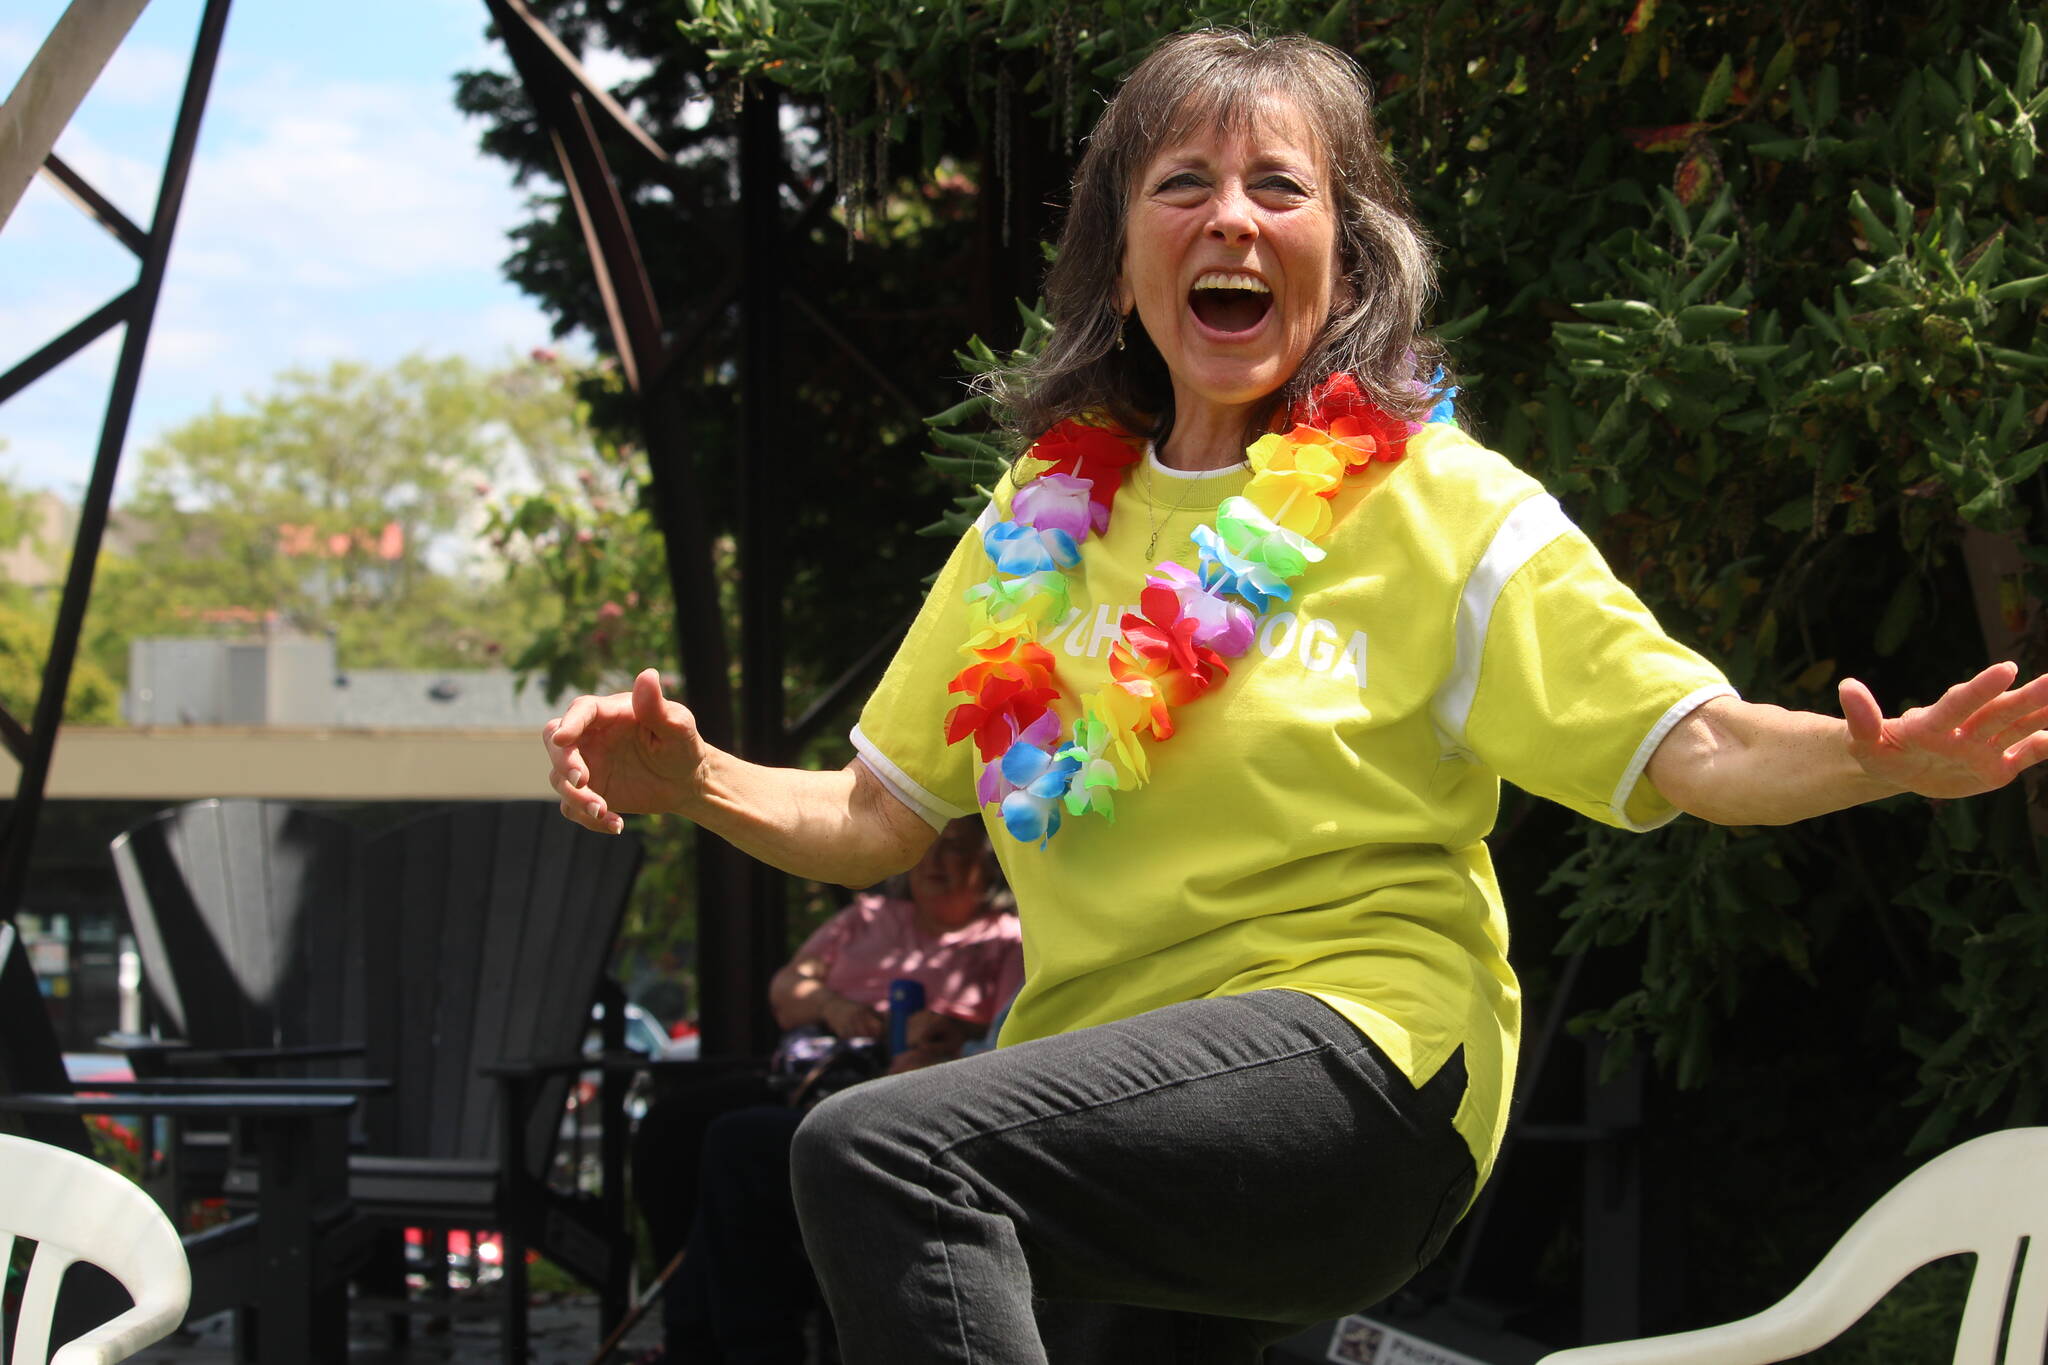 Tere Baker leads a laughter yoga session in Langley. The practice combines traditional yoga breathing with laughter to promote health, happiness and wellbeing.